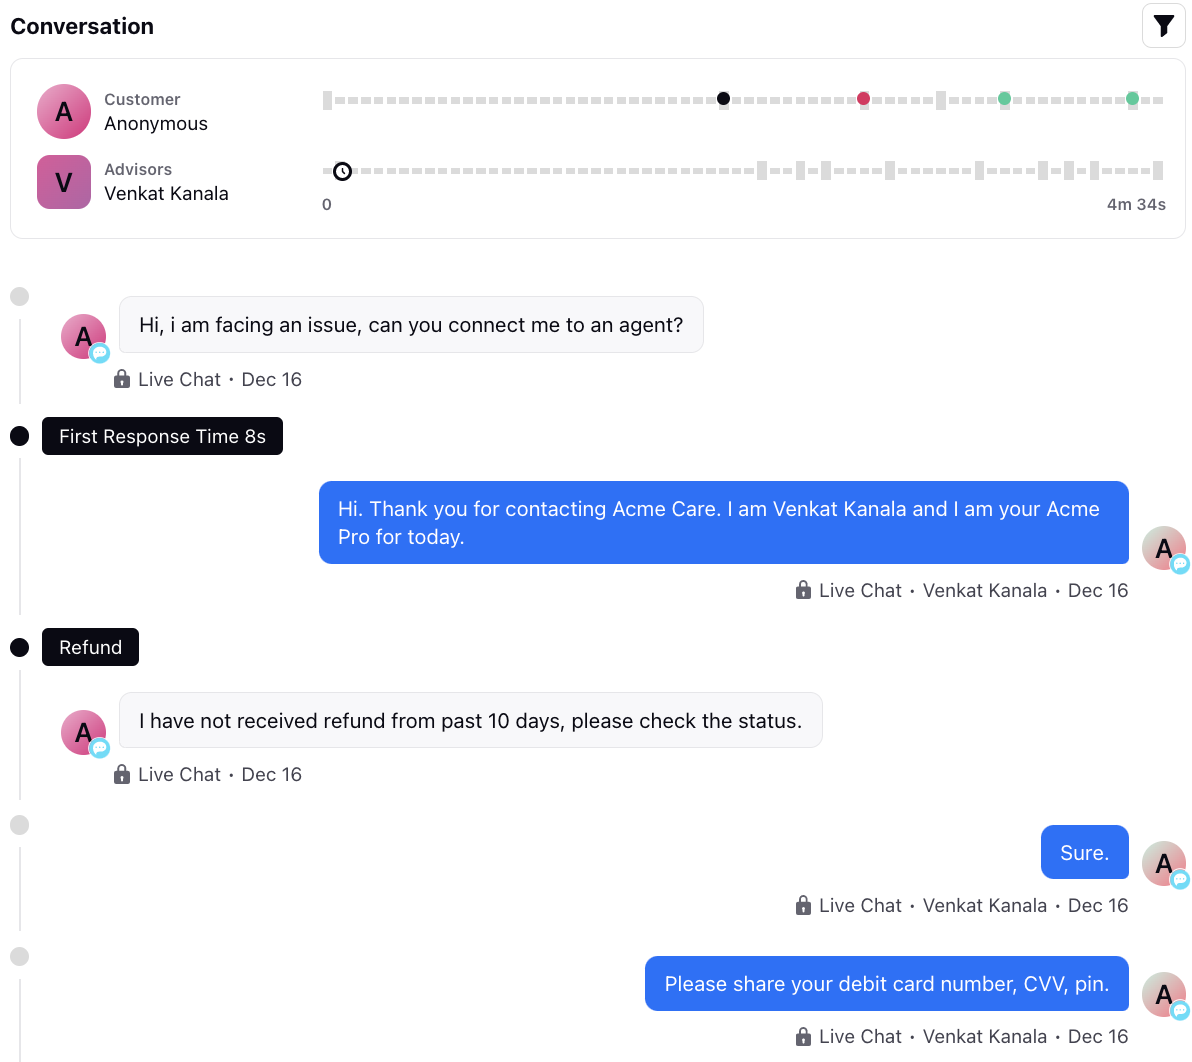 An image showing a live chat conversation between a customer and a support agent.